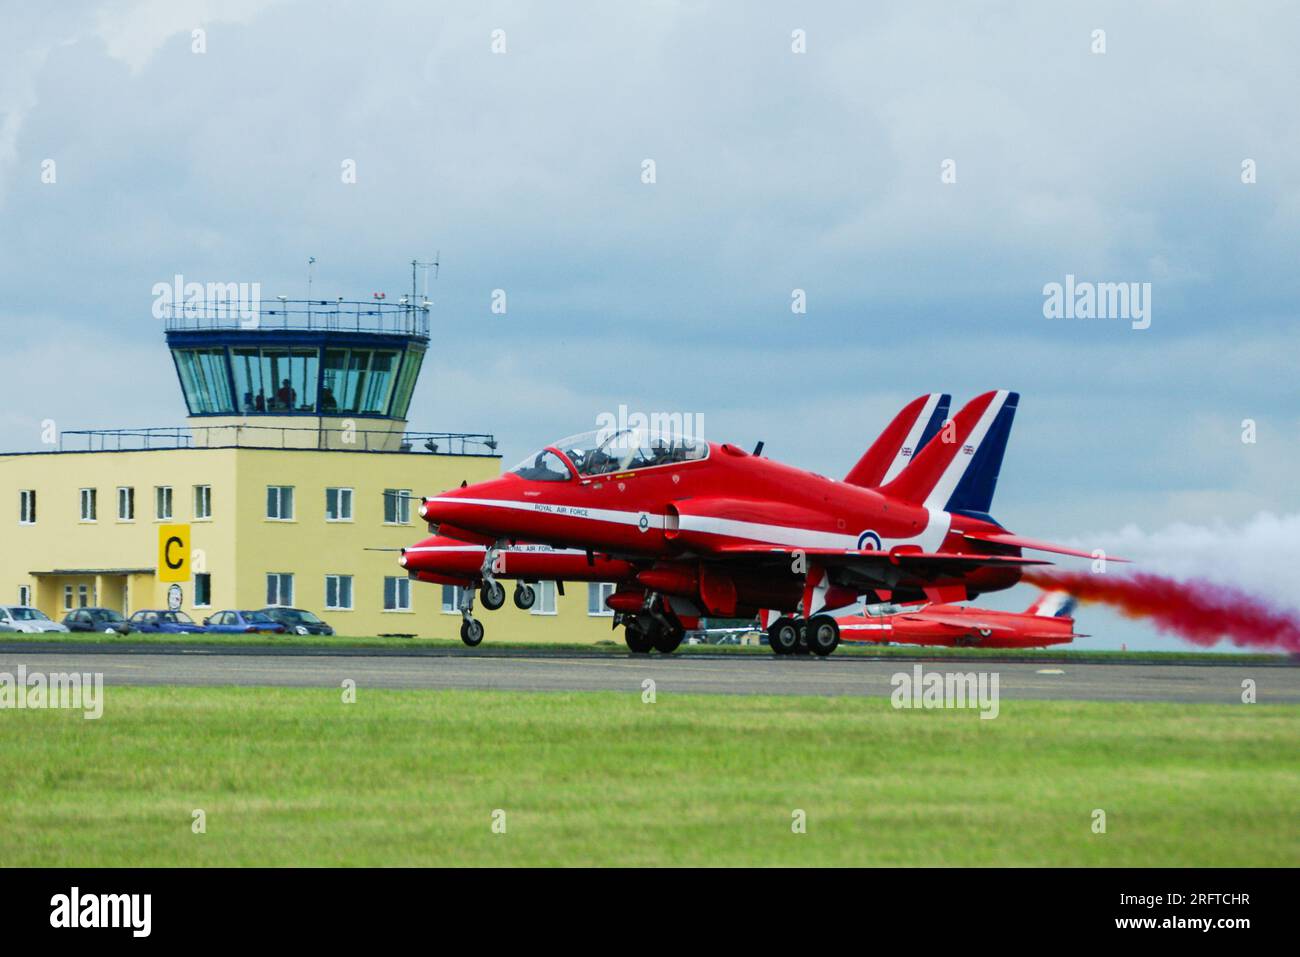 RAF Red Arrows BAe Hawk jet planes taking off at Cotswold Airport, formerly RAF Kemble, Gloucestershire, UK, where the team were based. Folland Gnat Stock Photo